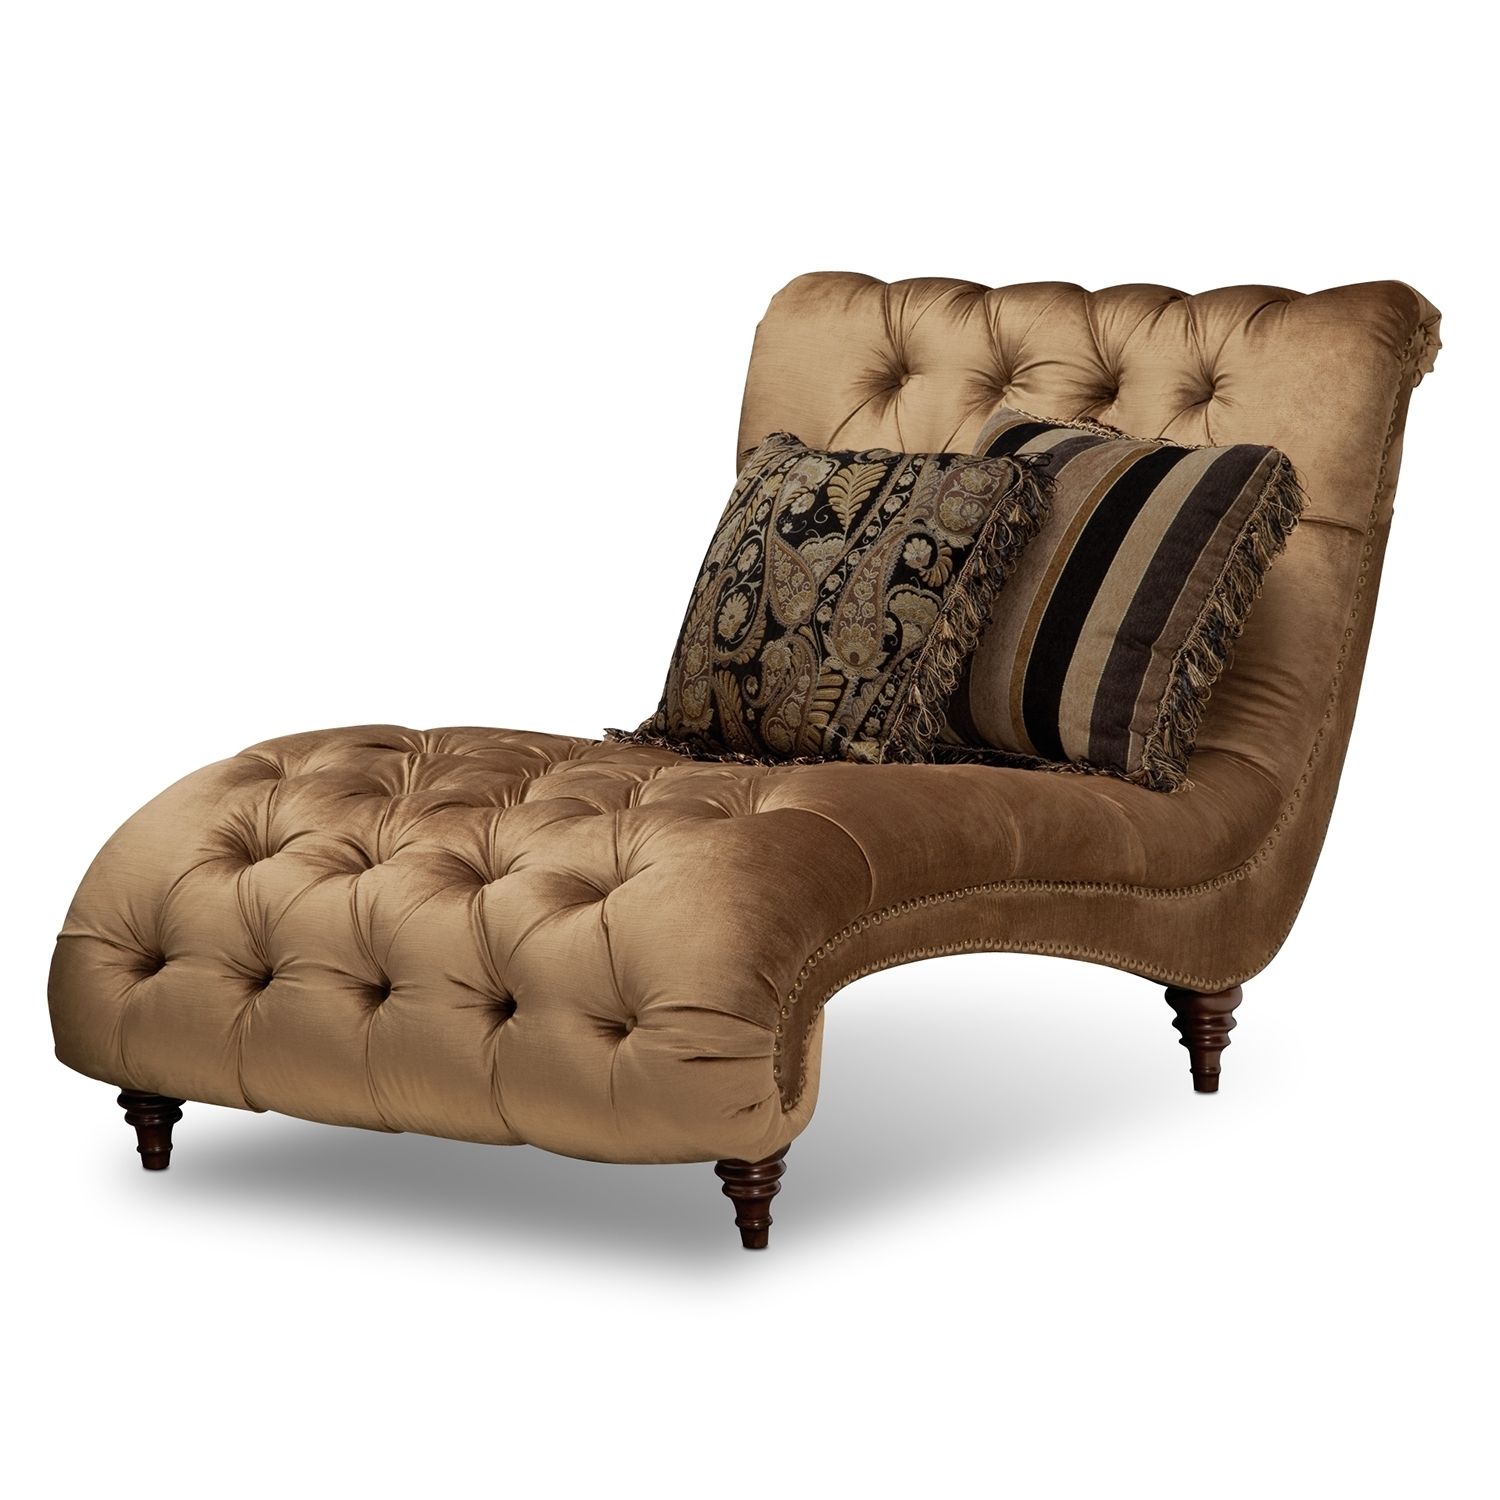 Gold Tufted Chaise Lounge Chair With Accent Pillows In Bedroom For Most Current Tufted Chaises (View 11 of 15)